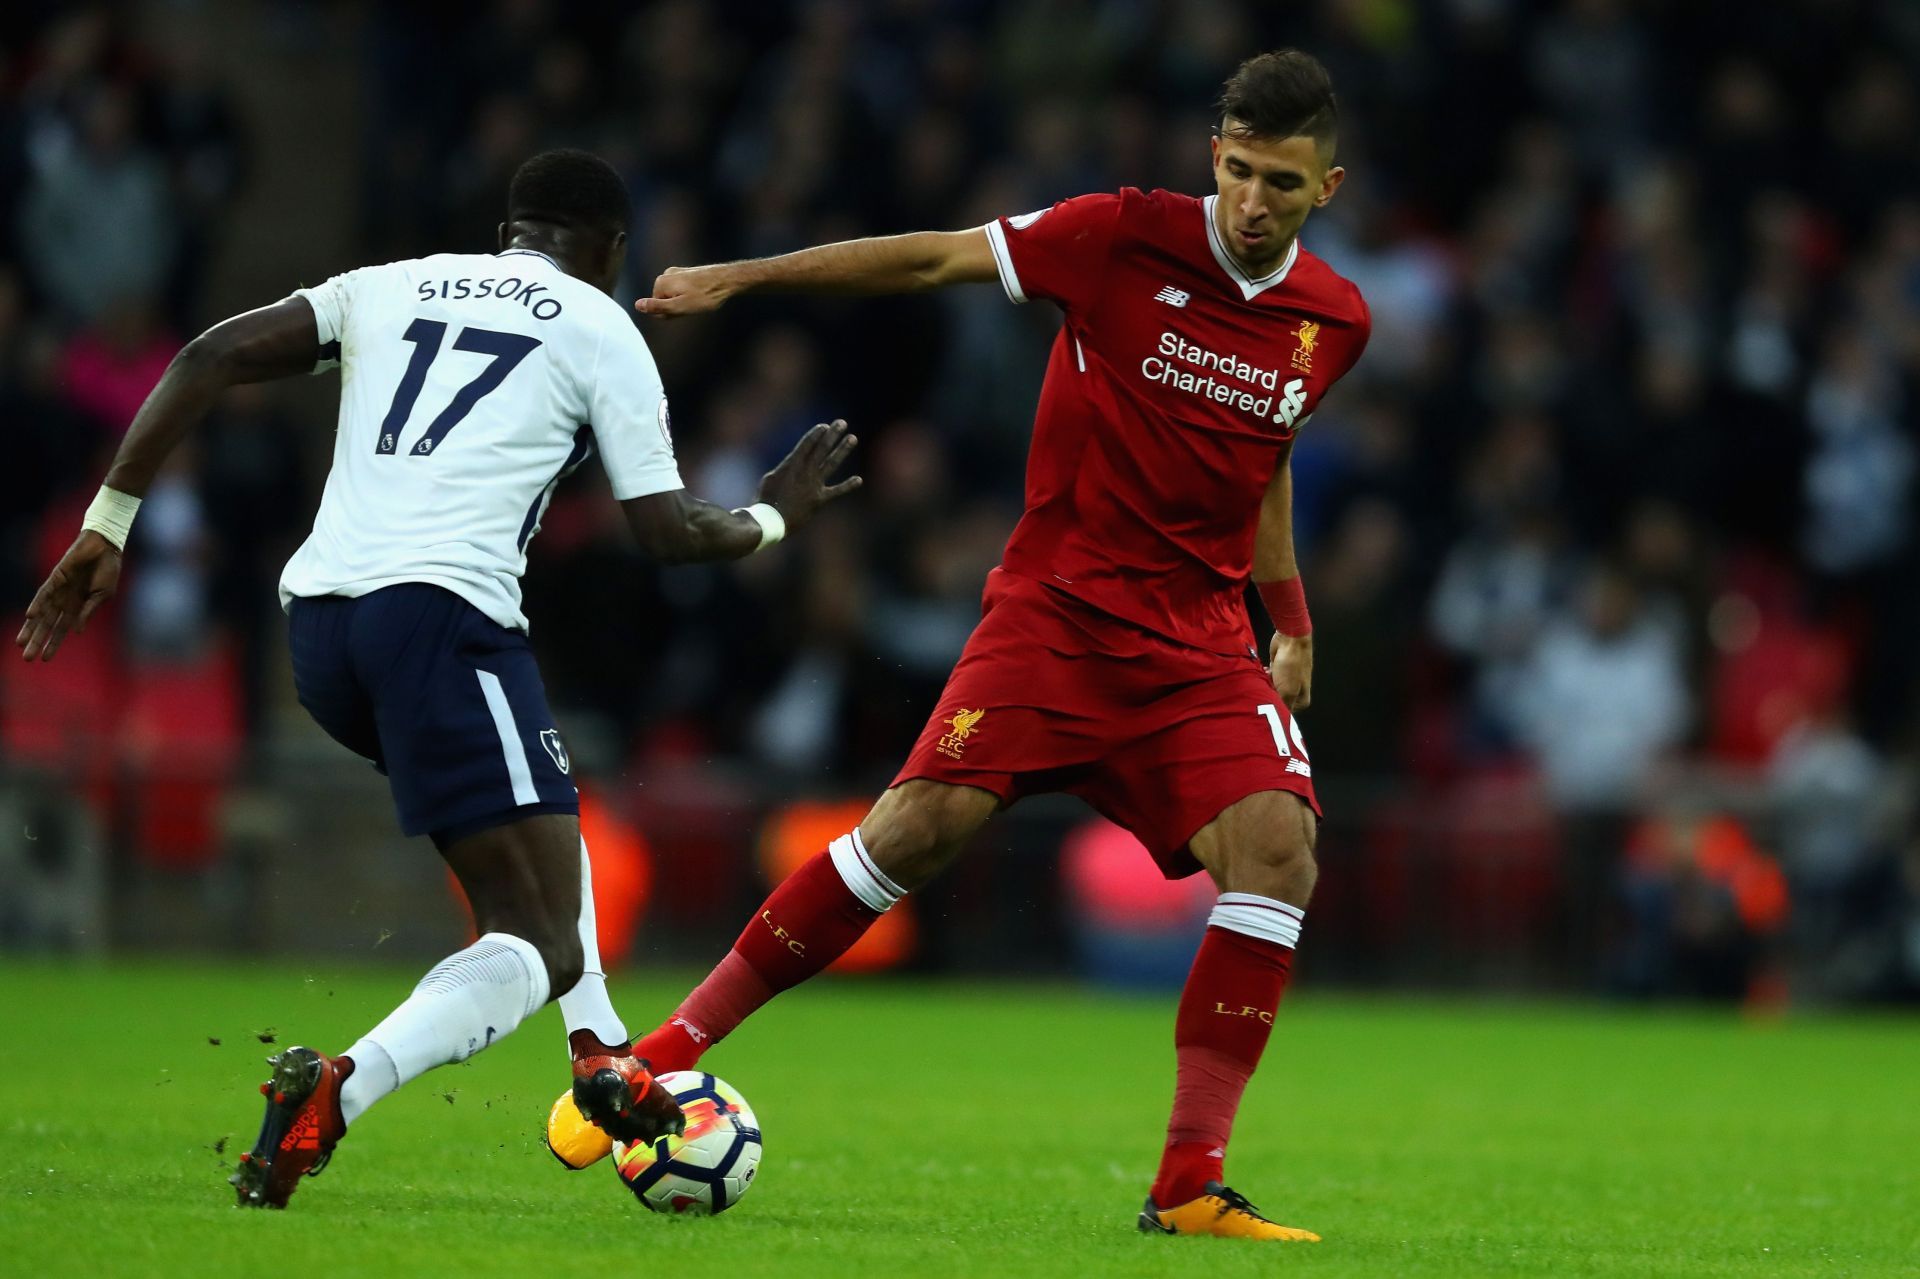 Marko Grujic failed to leave an impression at Anfield.